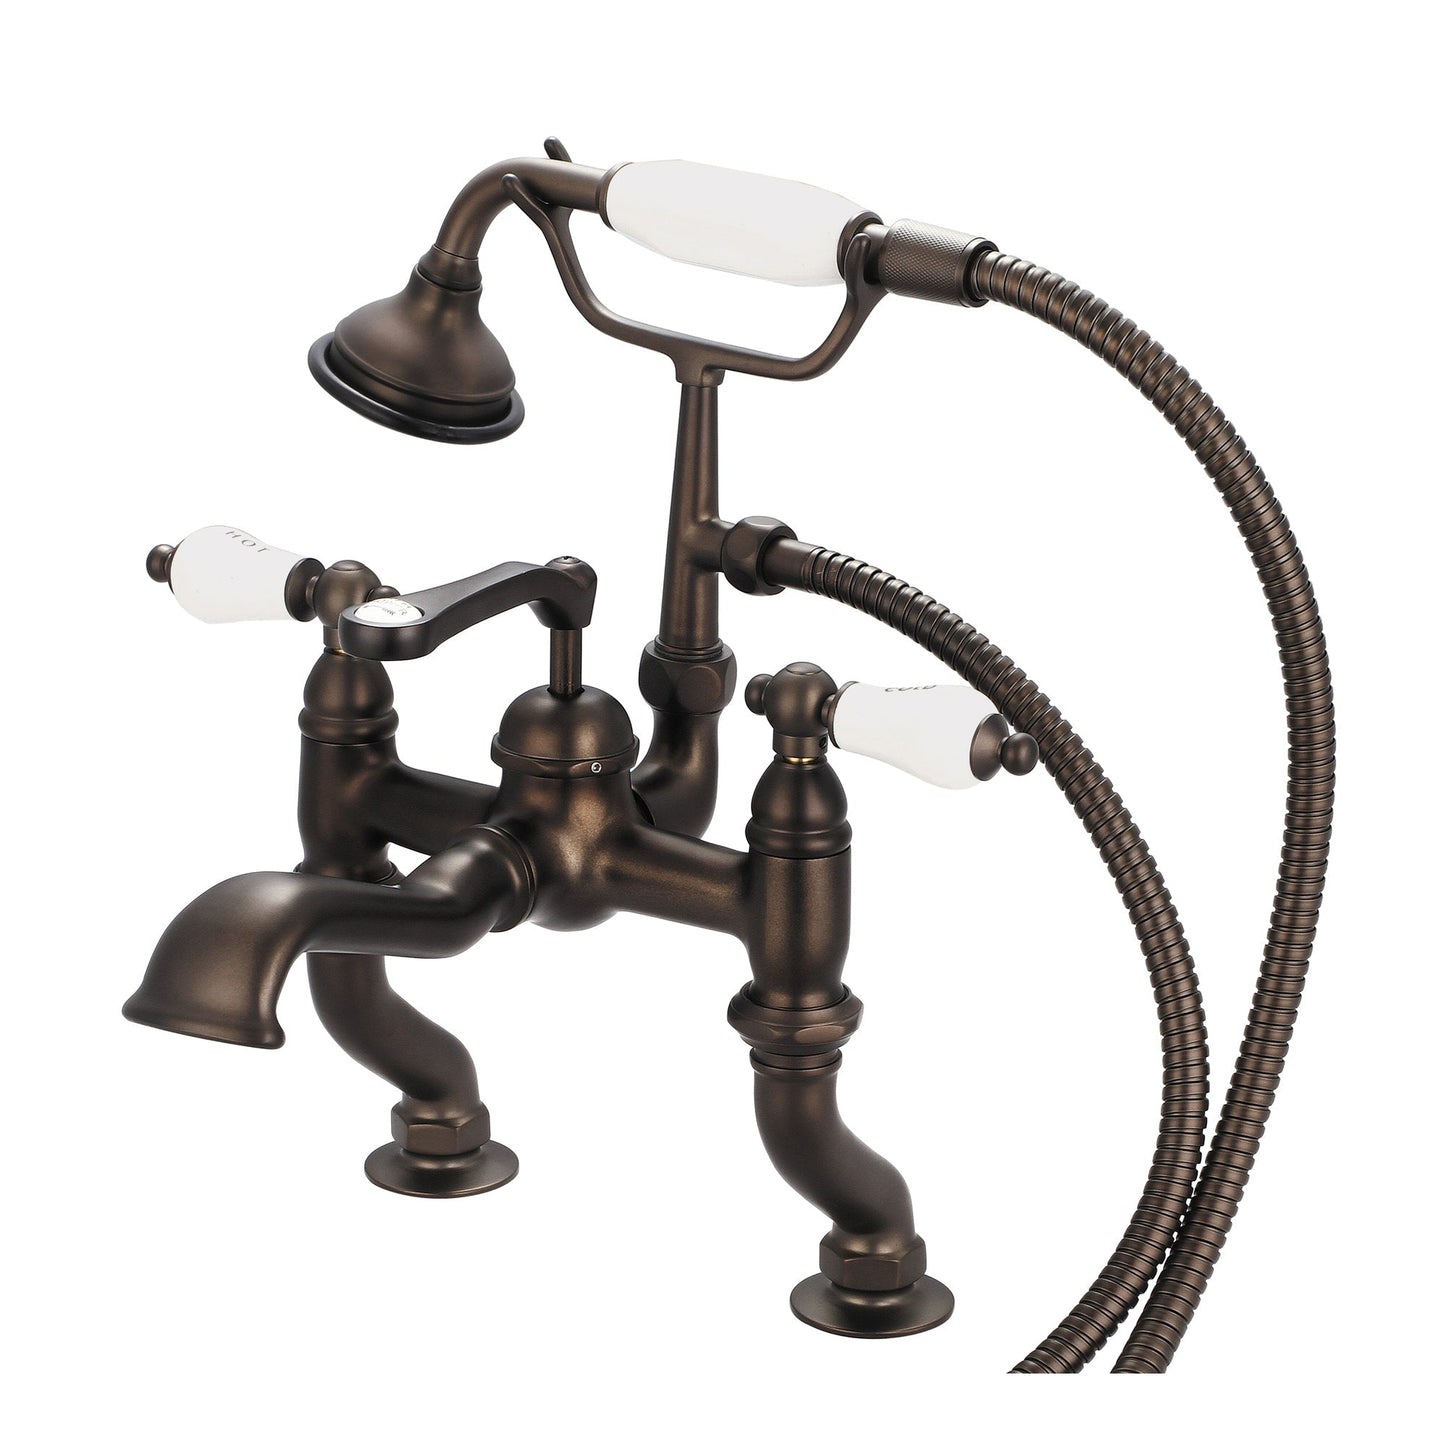 Water Creation Vintage Classic Adjustable Center Deck Mount Tub F6-0004 3.25" Brown Solid Brass Faucet With Handheld Shower And Porcelain Lever Handles, Hot And Cold Labels Included